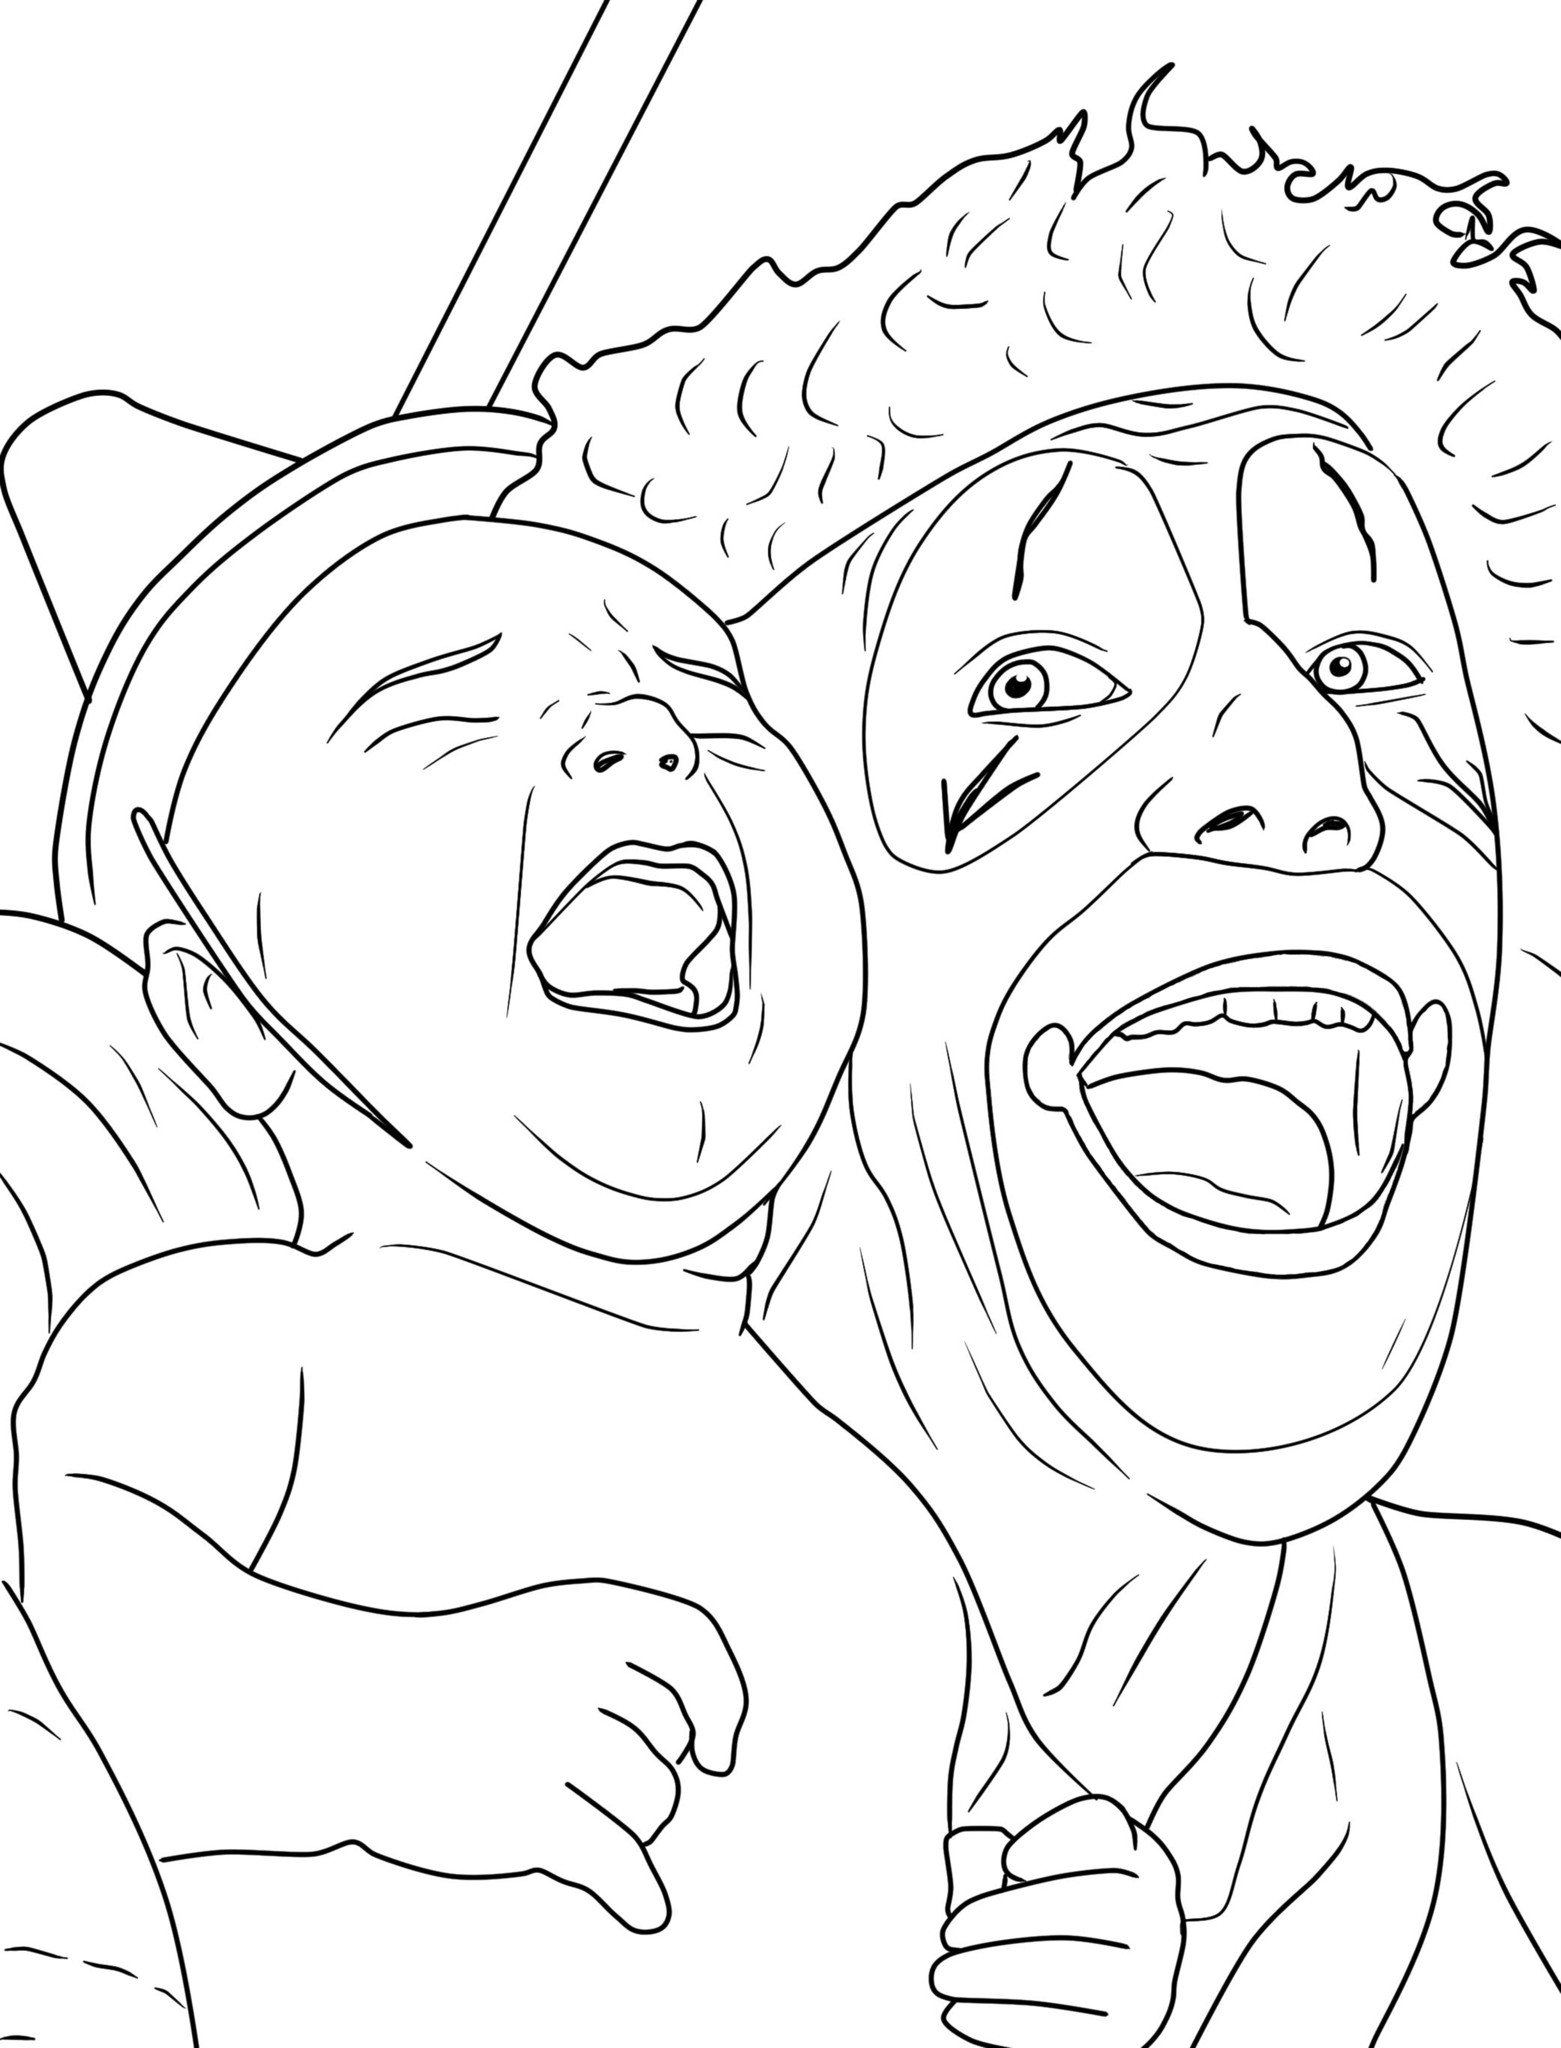 Insane Clown Posse Coloring Pages At Getcolorings.com | Free Printable